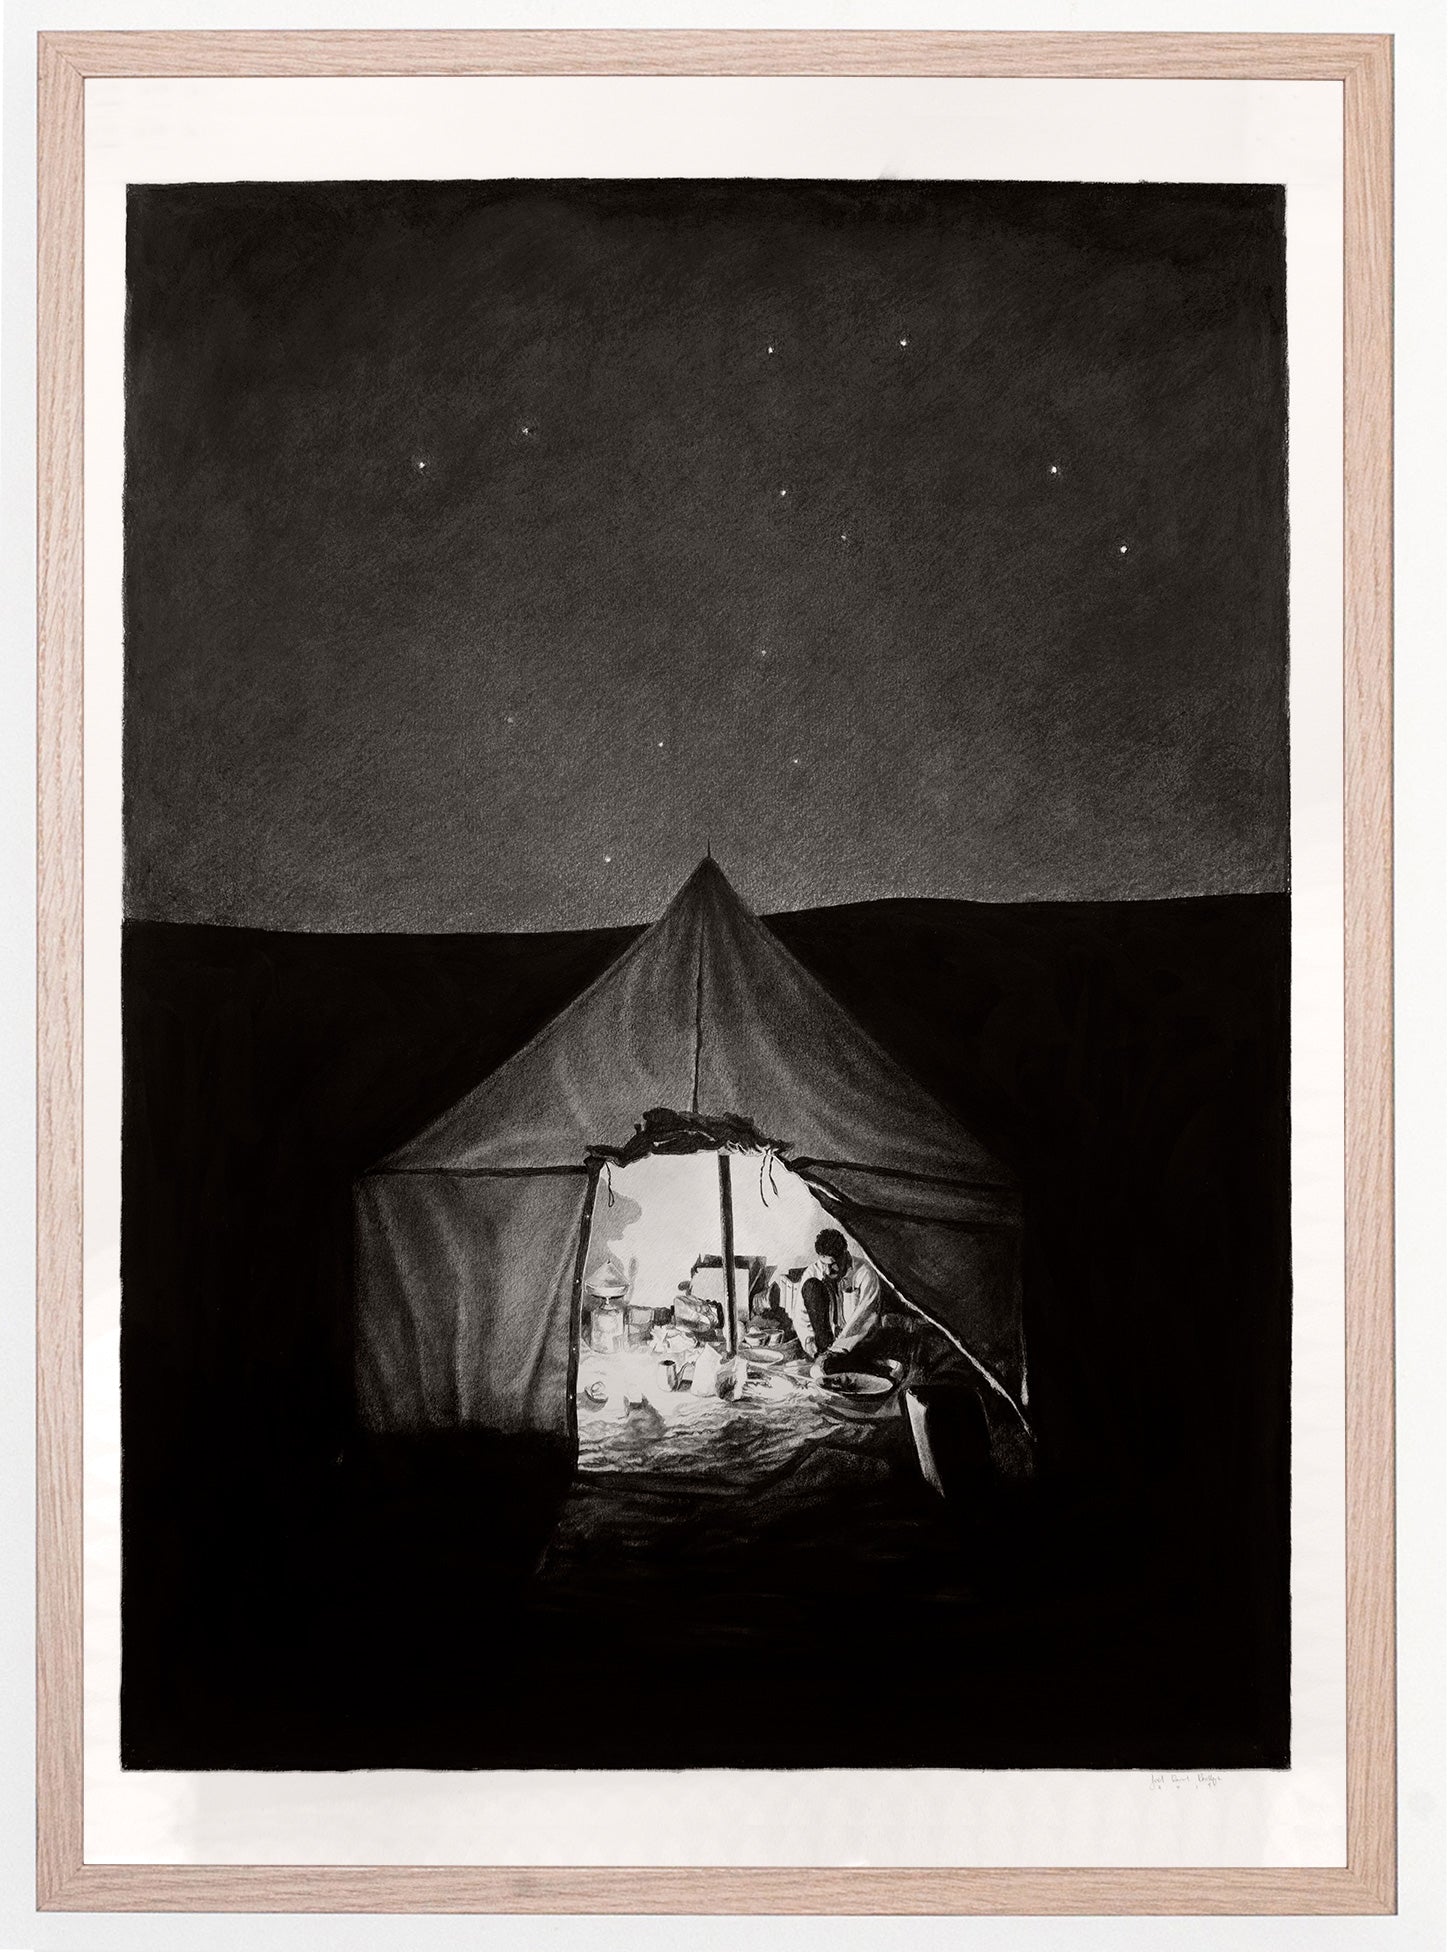 Illustration by Joel Daniel Phillips featuring a tent in the desert.